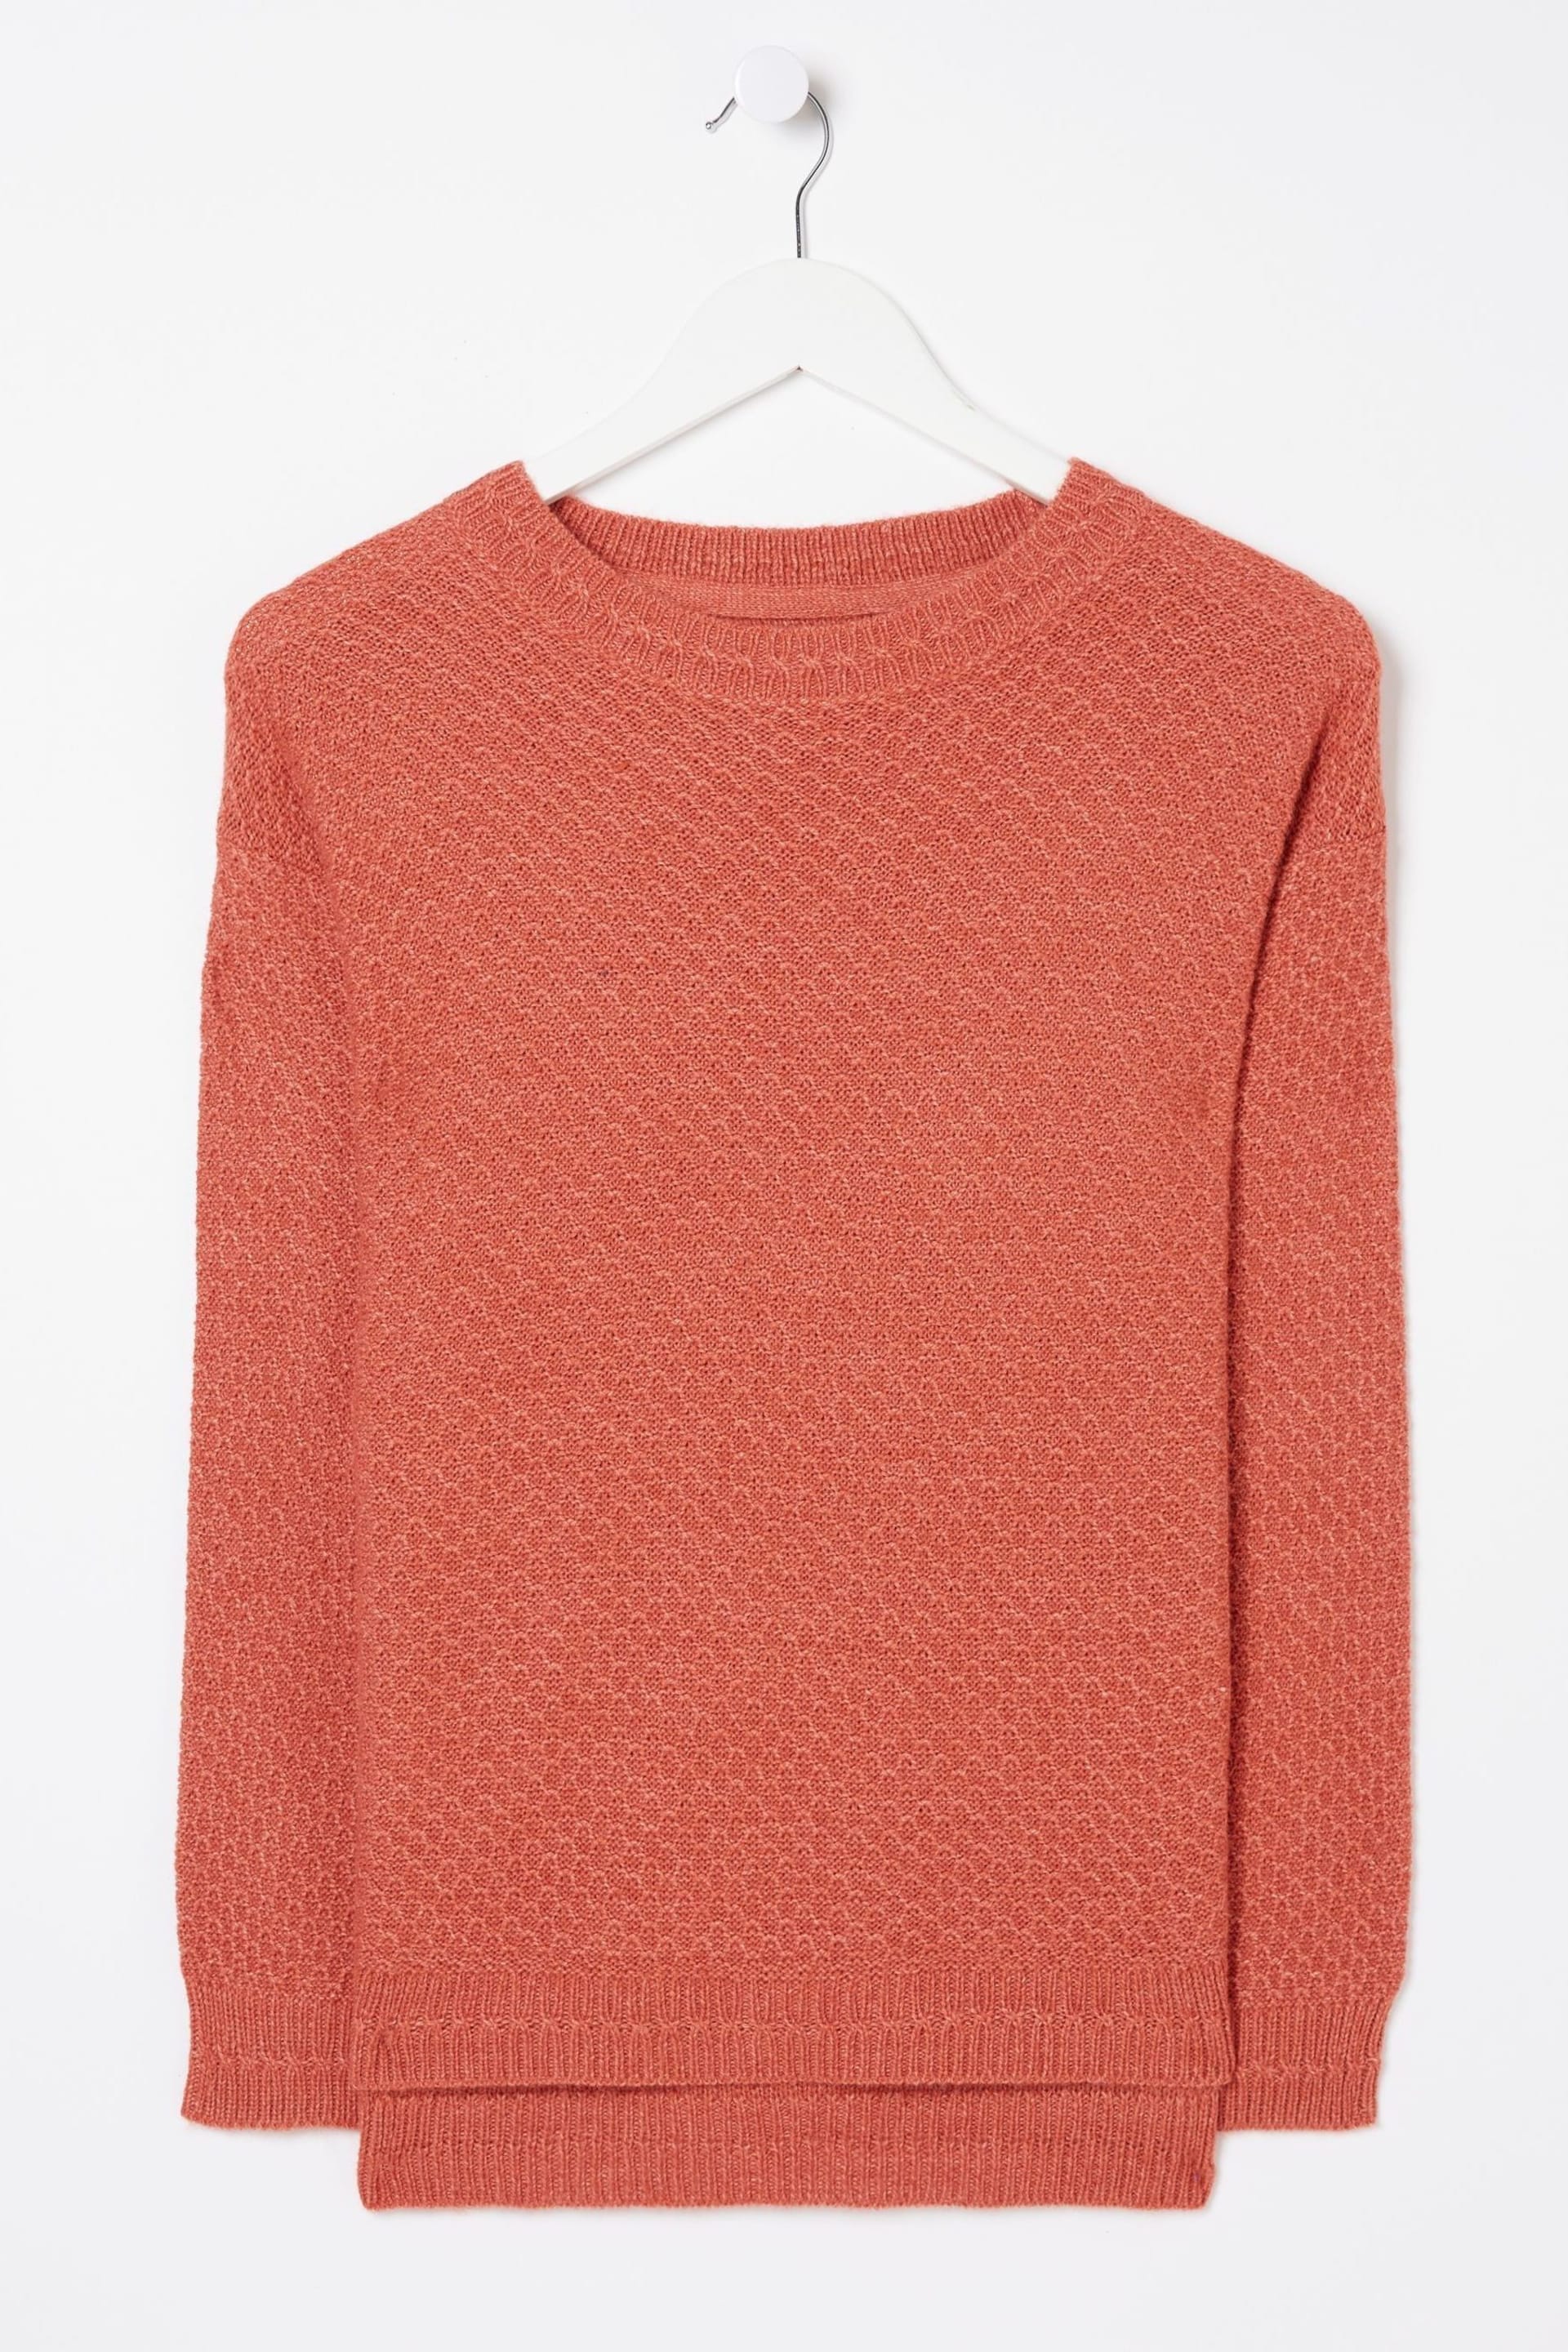 FatFace Red Jumper - Image 4 of 4